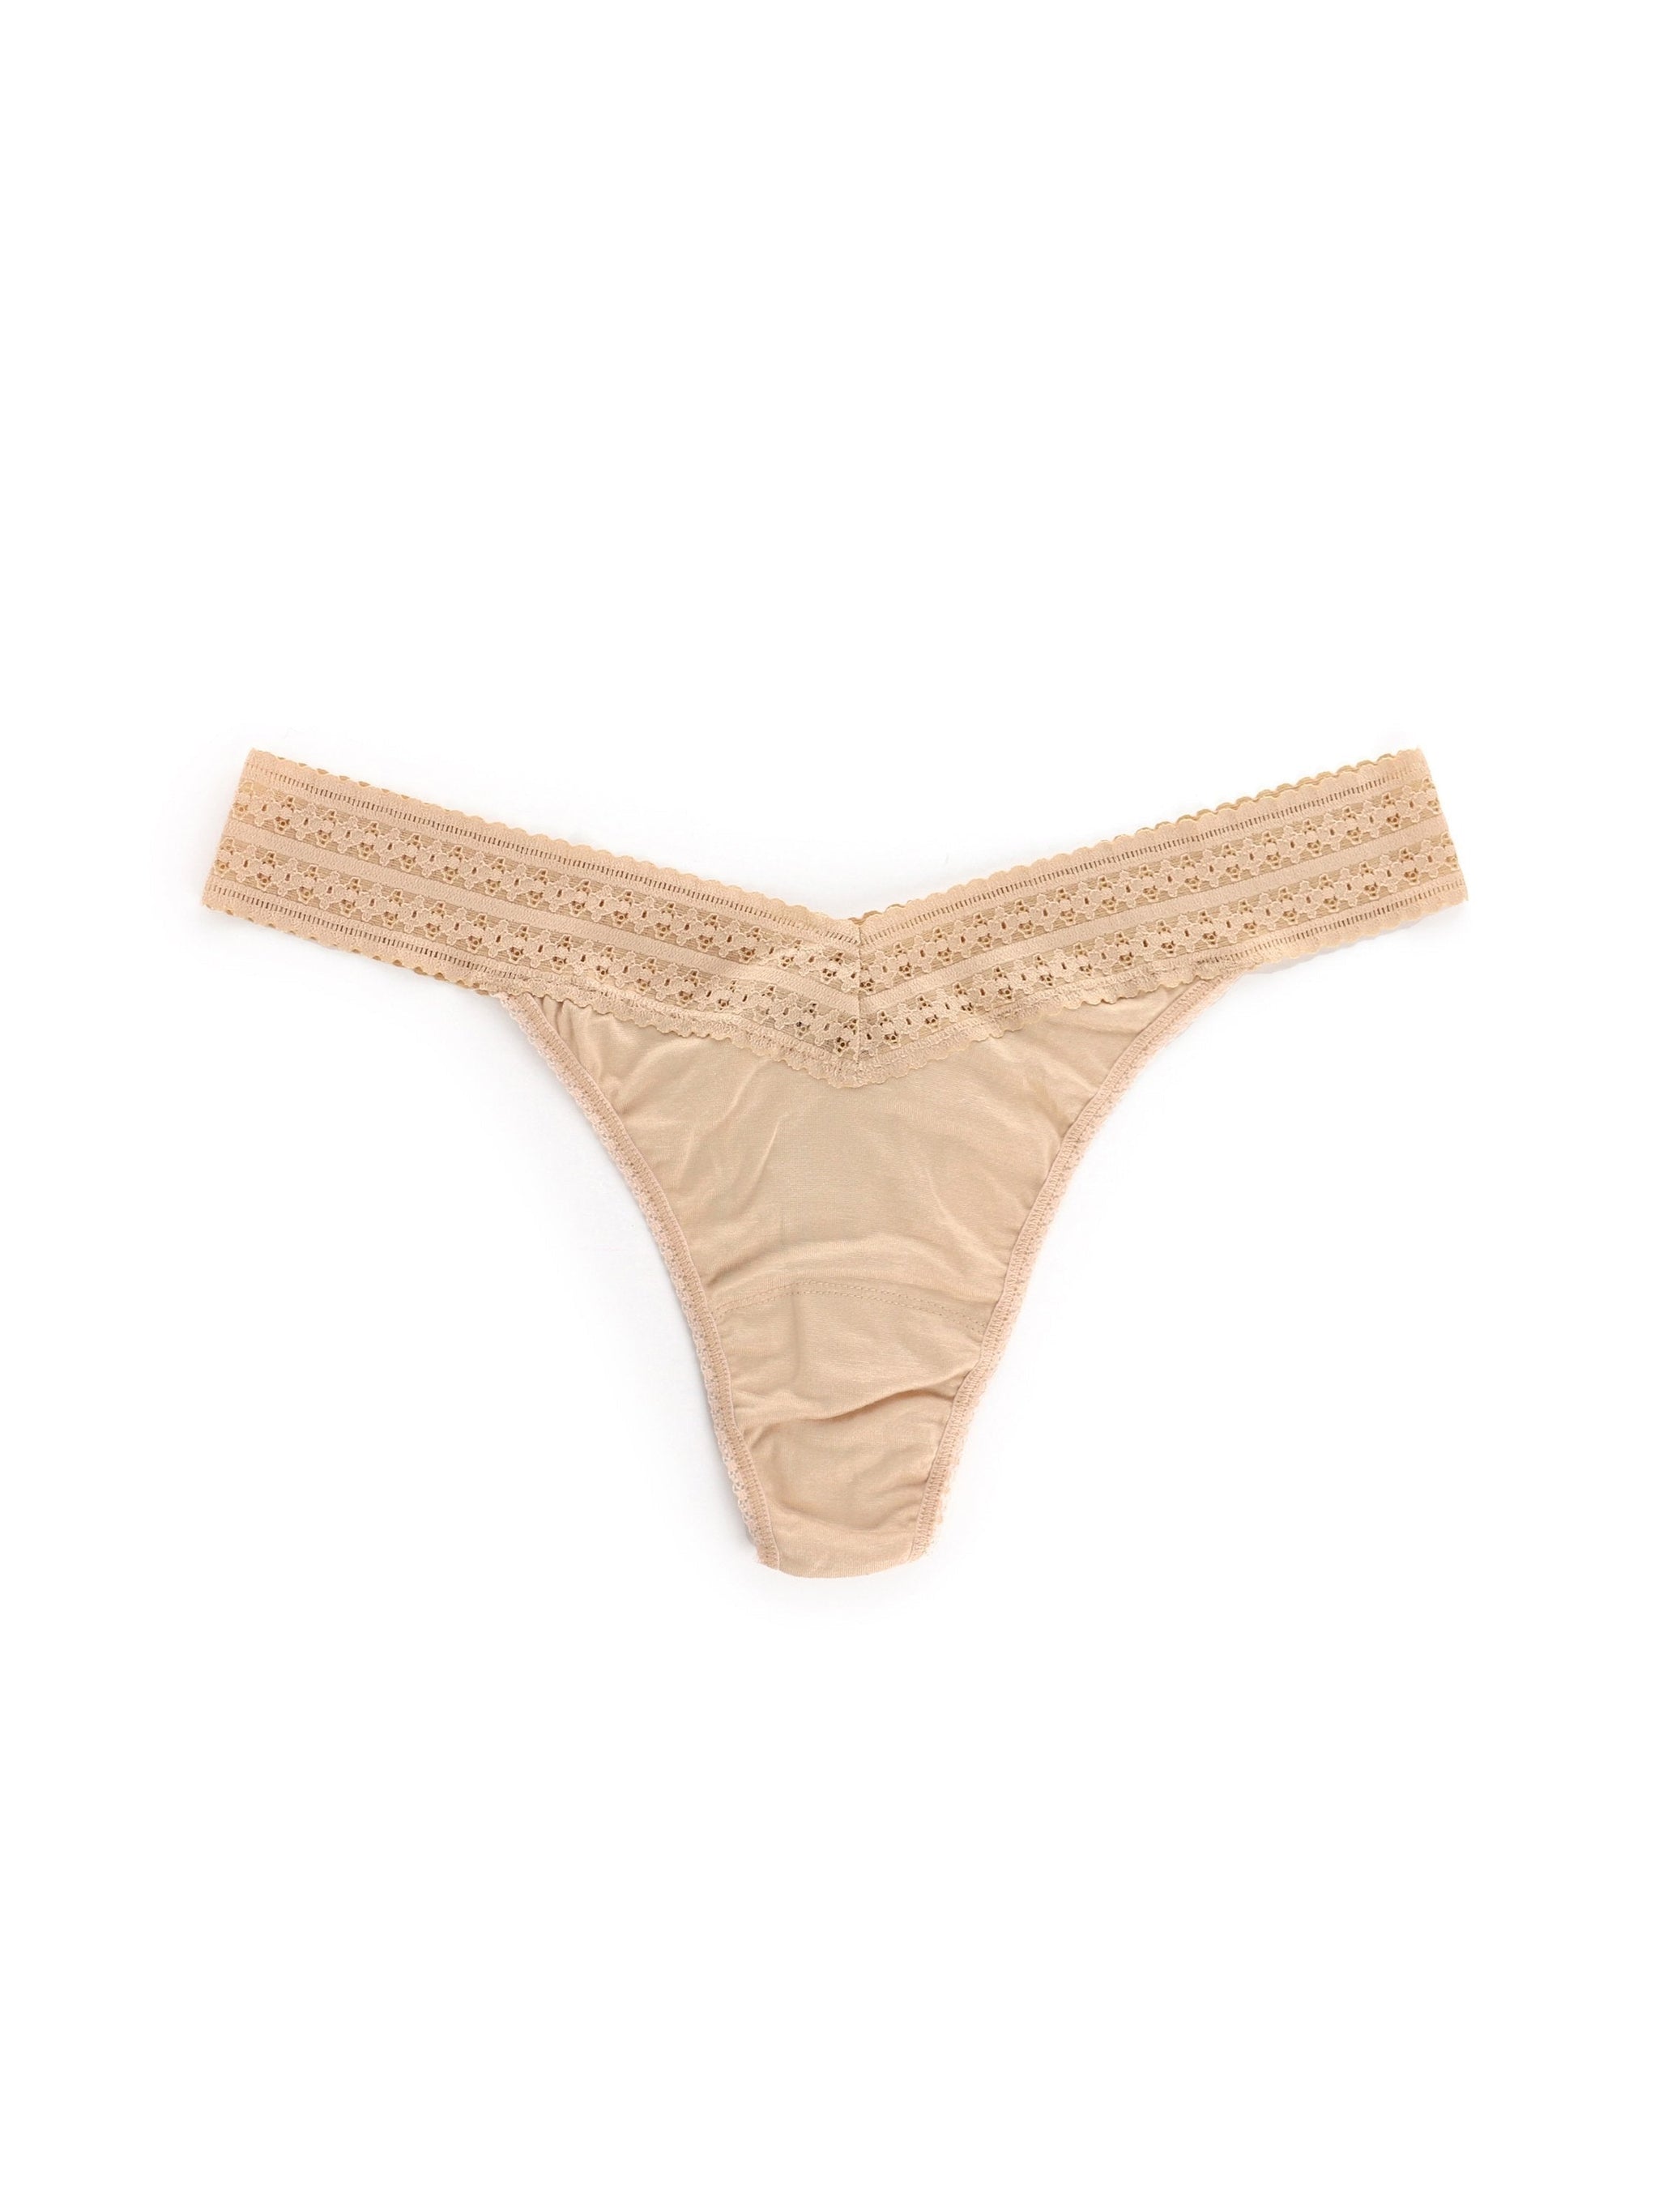 Hanky Panky: The Most Flattering Underwear - cathclaire